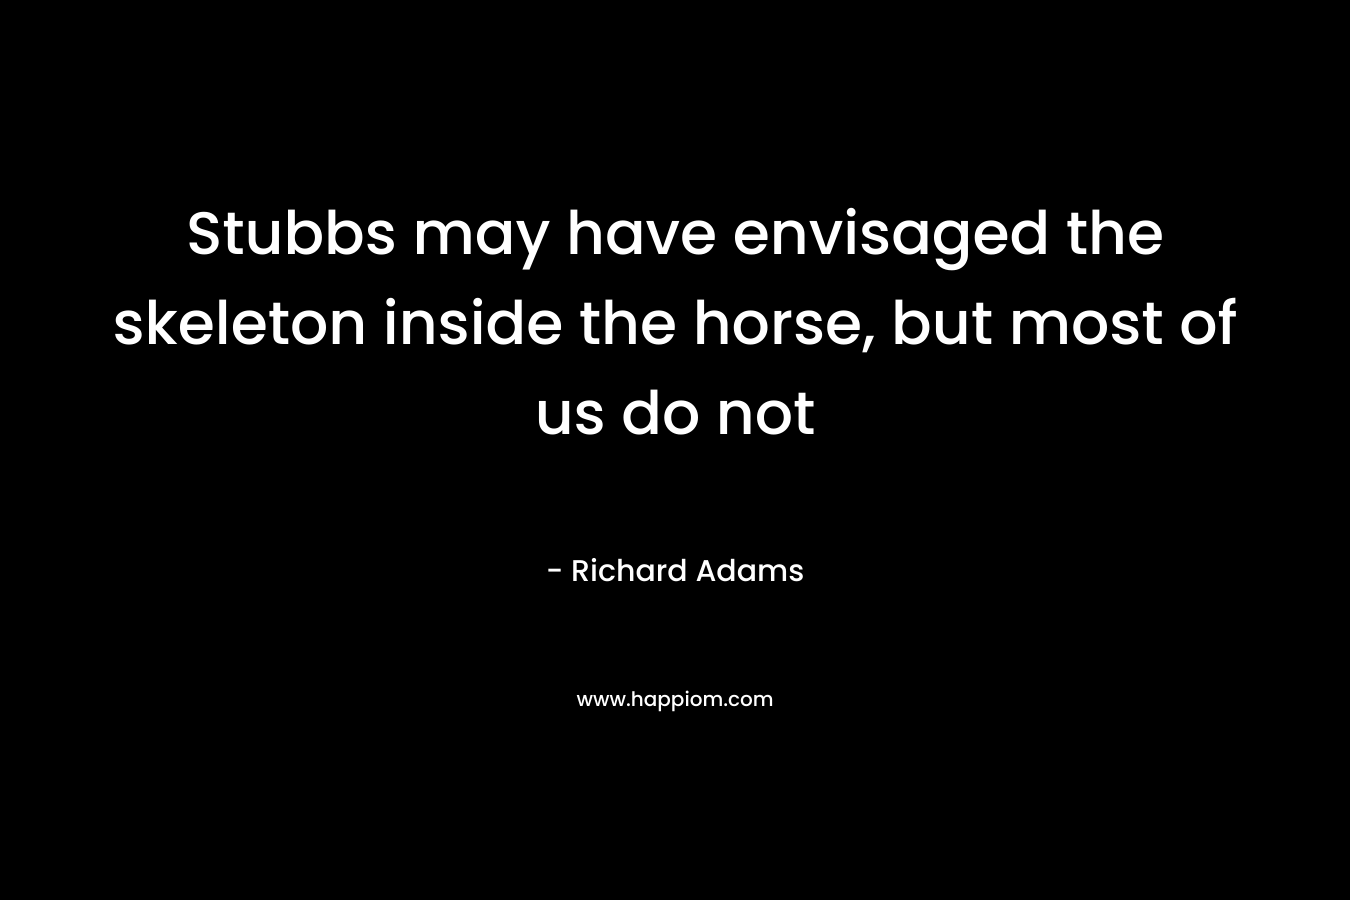 Stubbs may have envisaged the skeleton inside the horse, but most of us do not